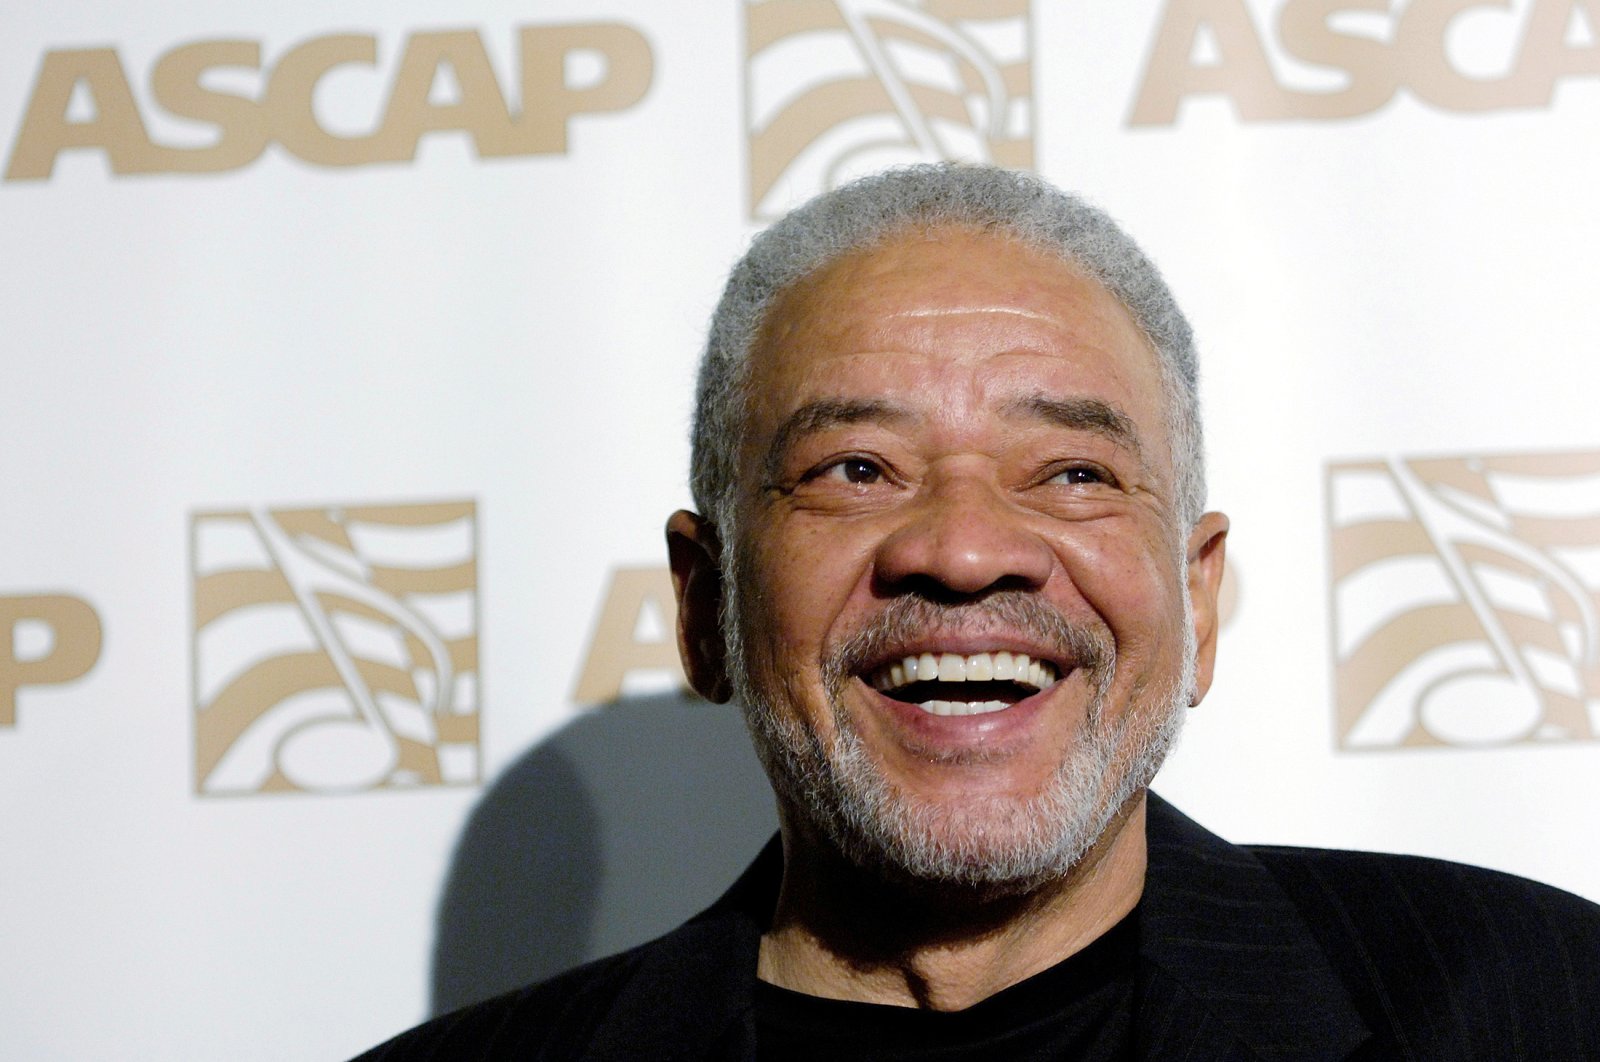 Bill Withers, recipient of the Heritage Award, arrives at the ASCAP Rhythm & Soul Music Awards in Beverly Hills June 26, 2006. (REUTERS)